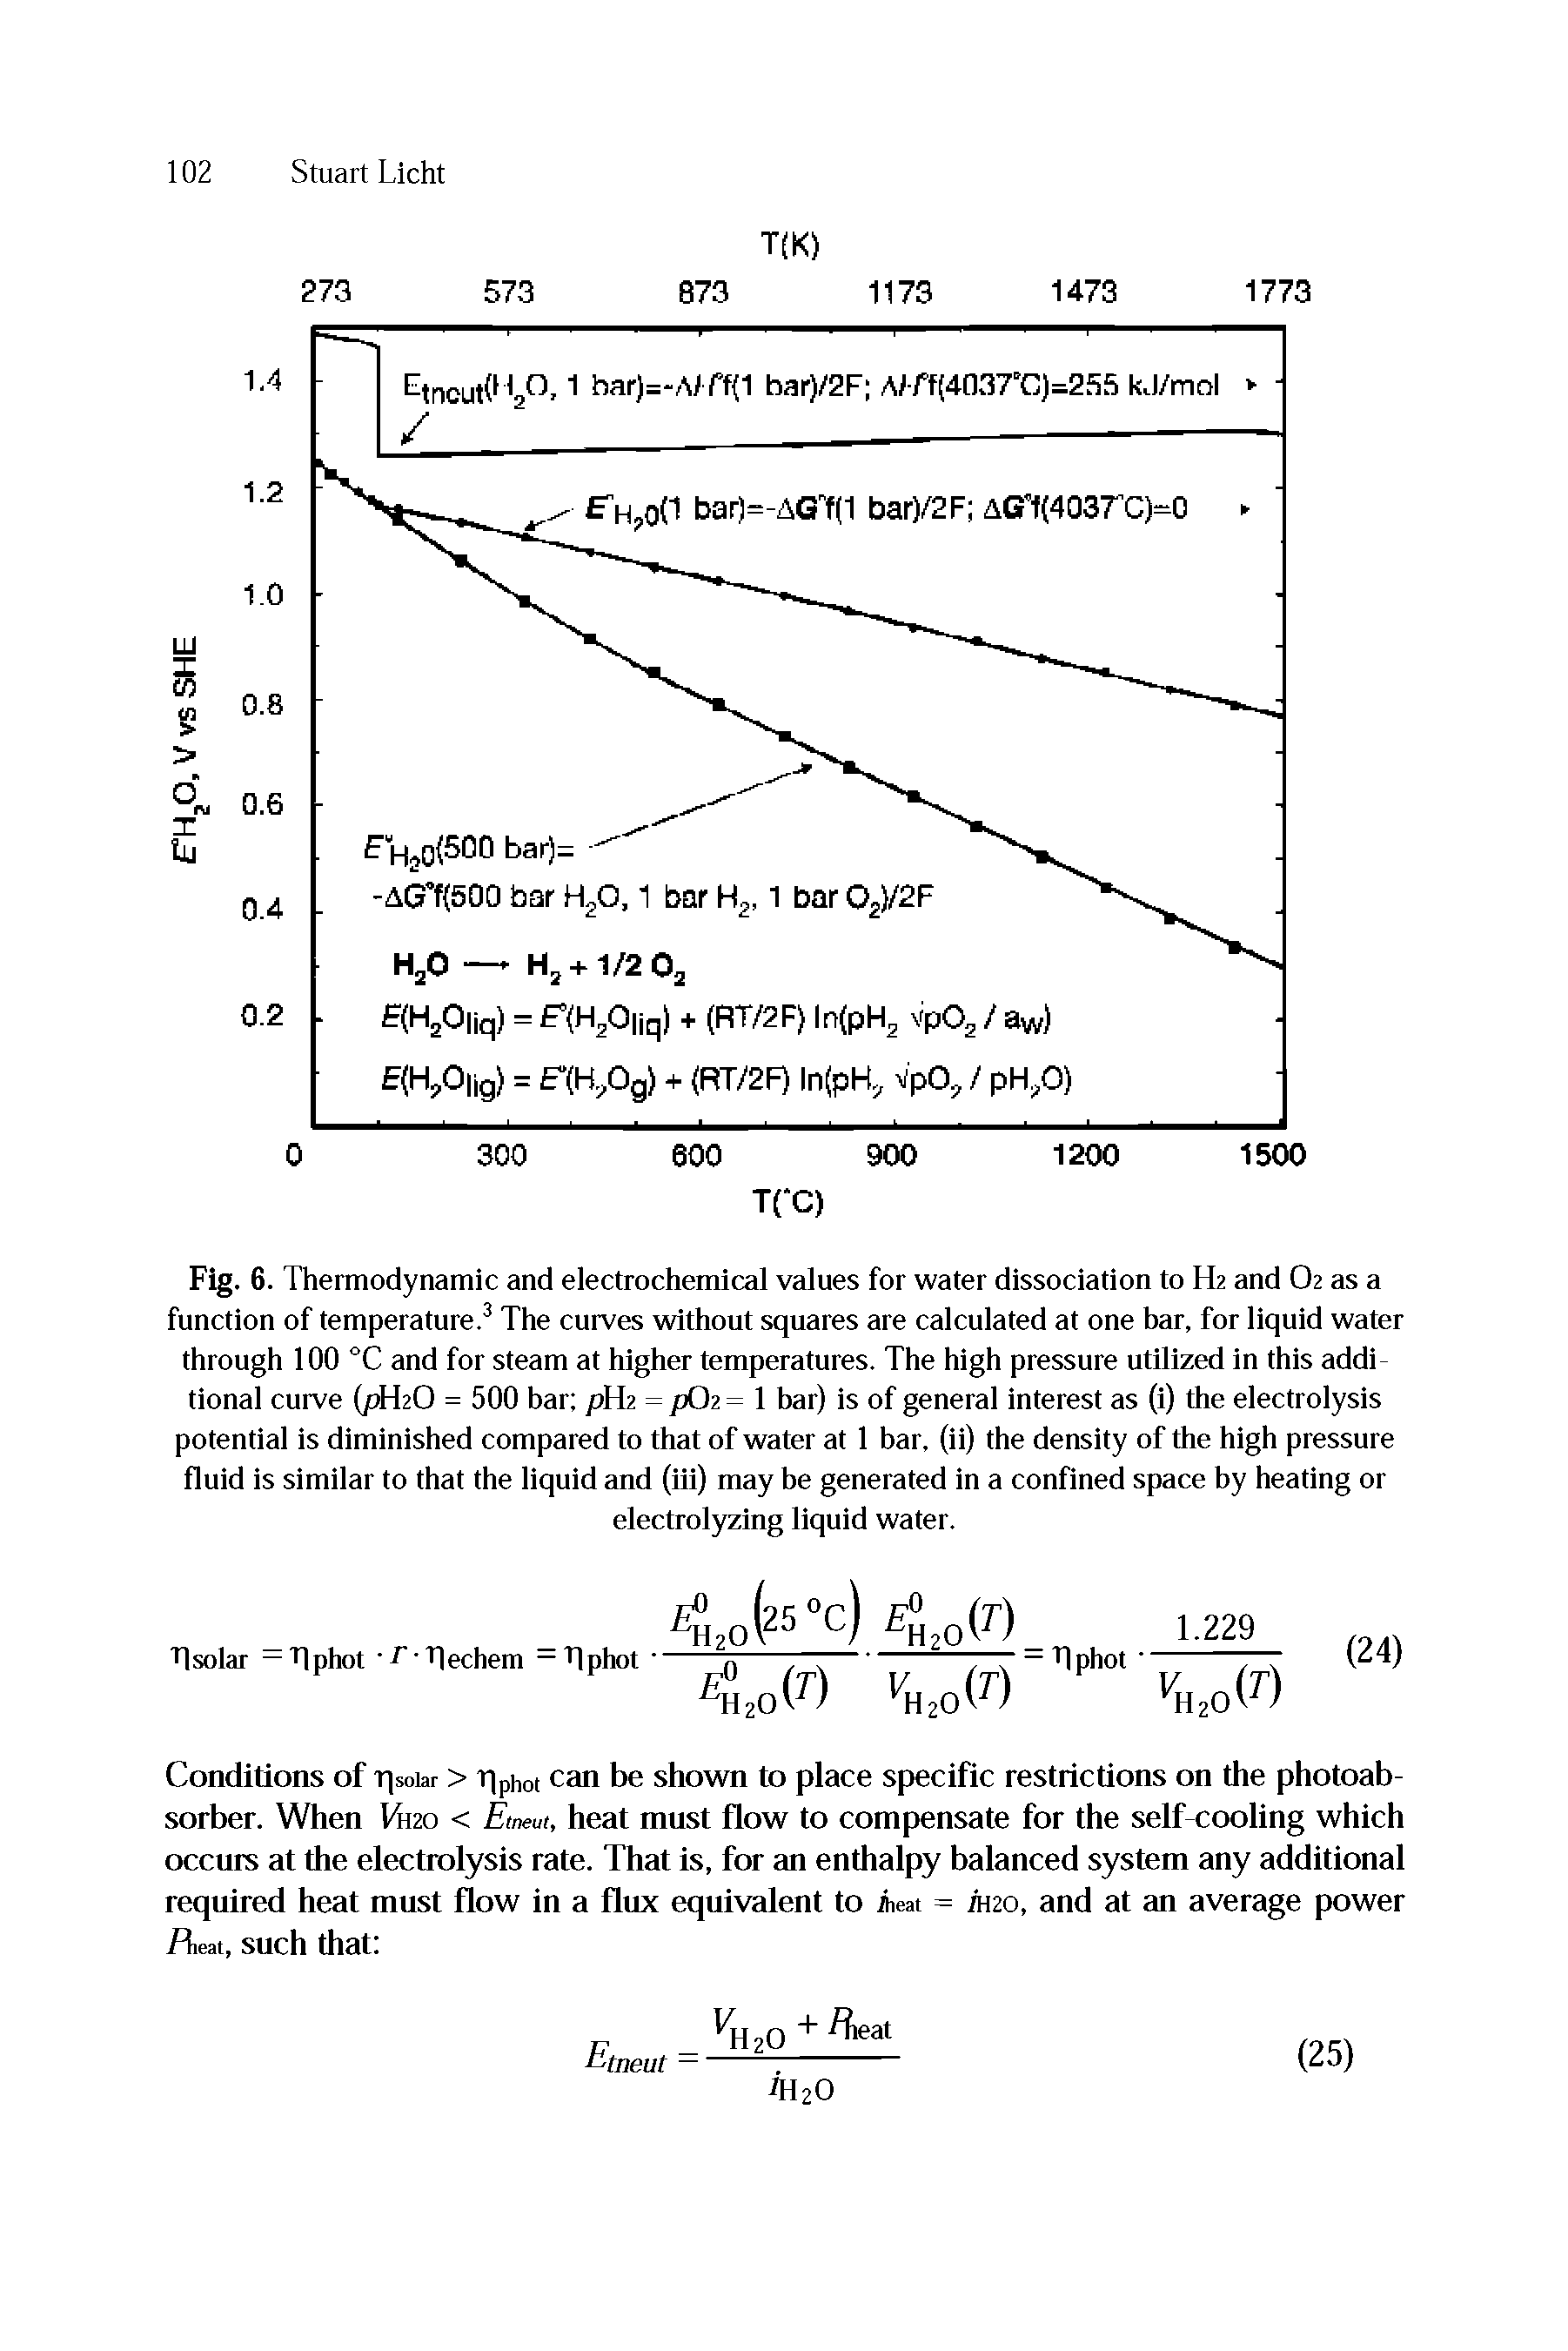 Fig. 6. Thermodynamic and electrochemical values for water dissociation to H2 and O2 as a function of temperature.3 The curves without squares are calculated at one bar, for liquid water through 100 °C and for steam at higher temperatures. The high pressure utilized in this additional curve (pFhO = 500 bar pfh = pOz = 1 bar) is of general interest as (i) the electrolysis potential is diminished compared to that of water at 1 bar, (ii) the density of the high pressure fluid is similar to that the liquid and (iii) may be generated in a confined space by heating or...